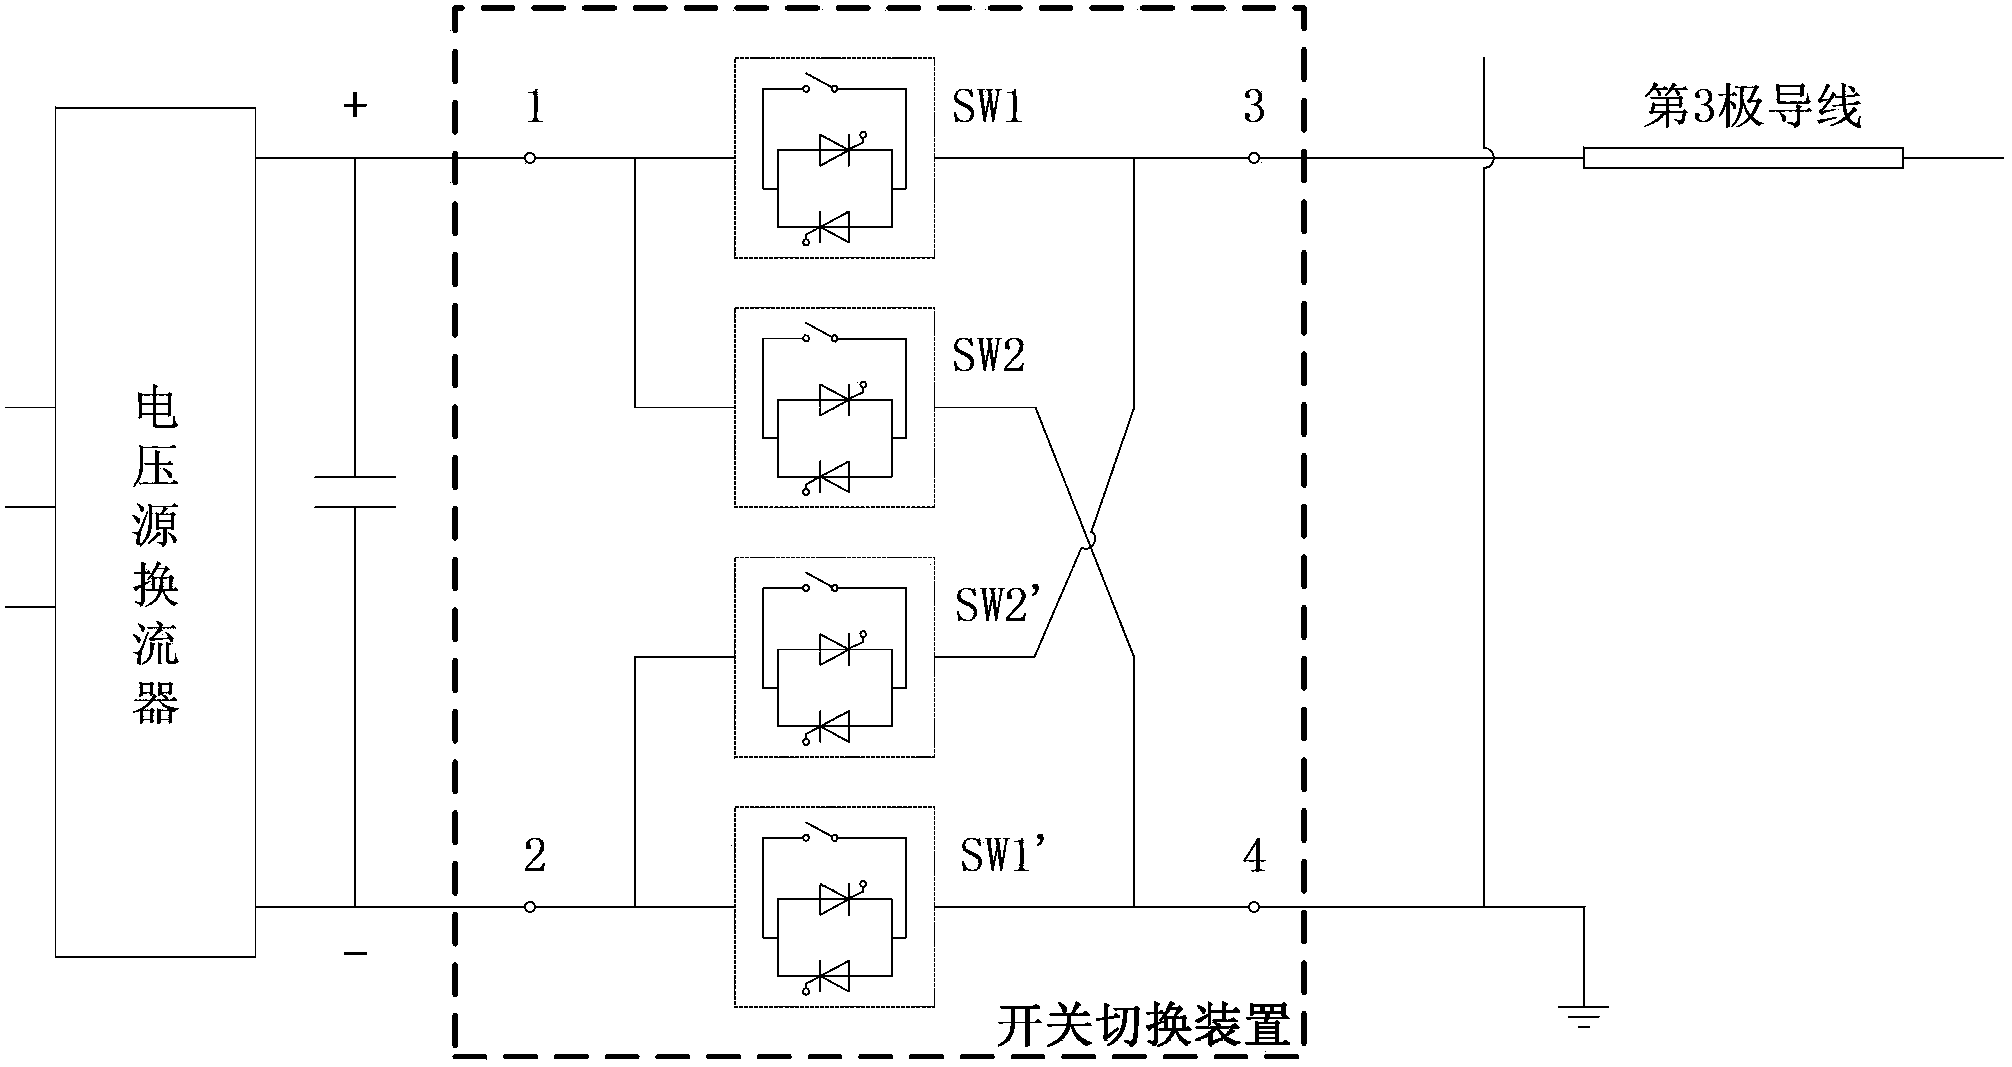 Power transmission system for improving transmission capability of alternating-current circuit through using voltage source current converting technology